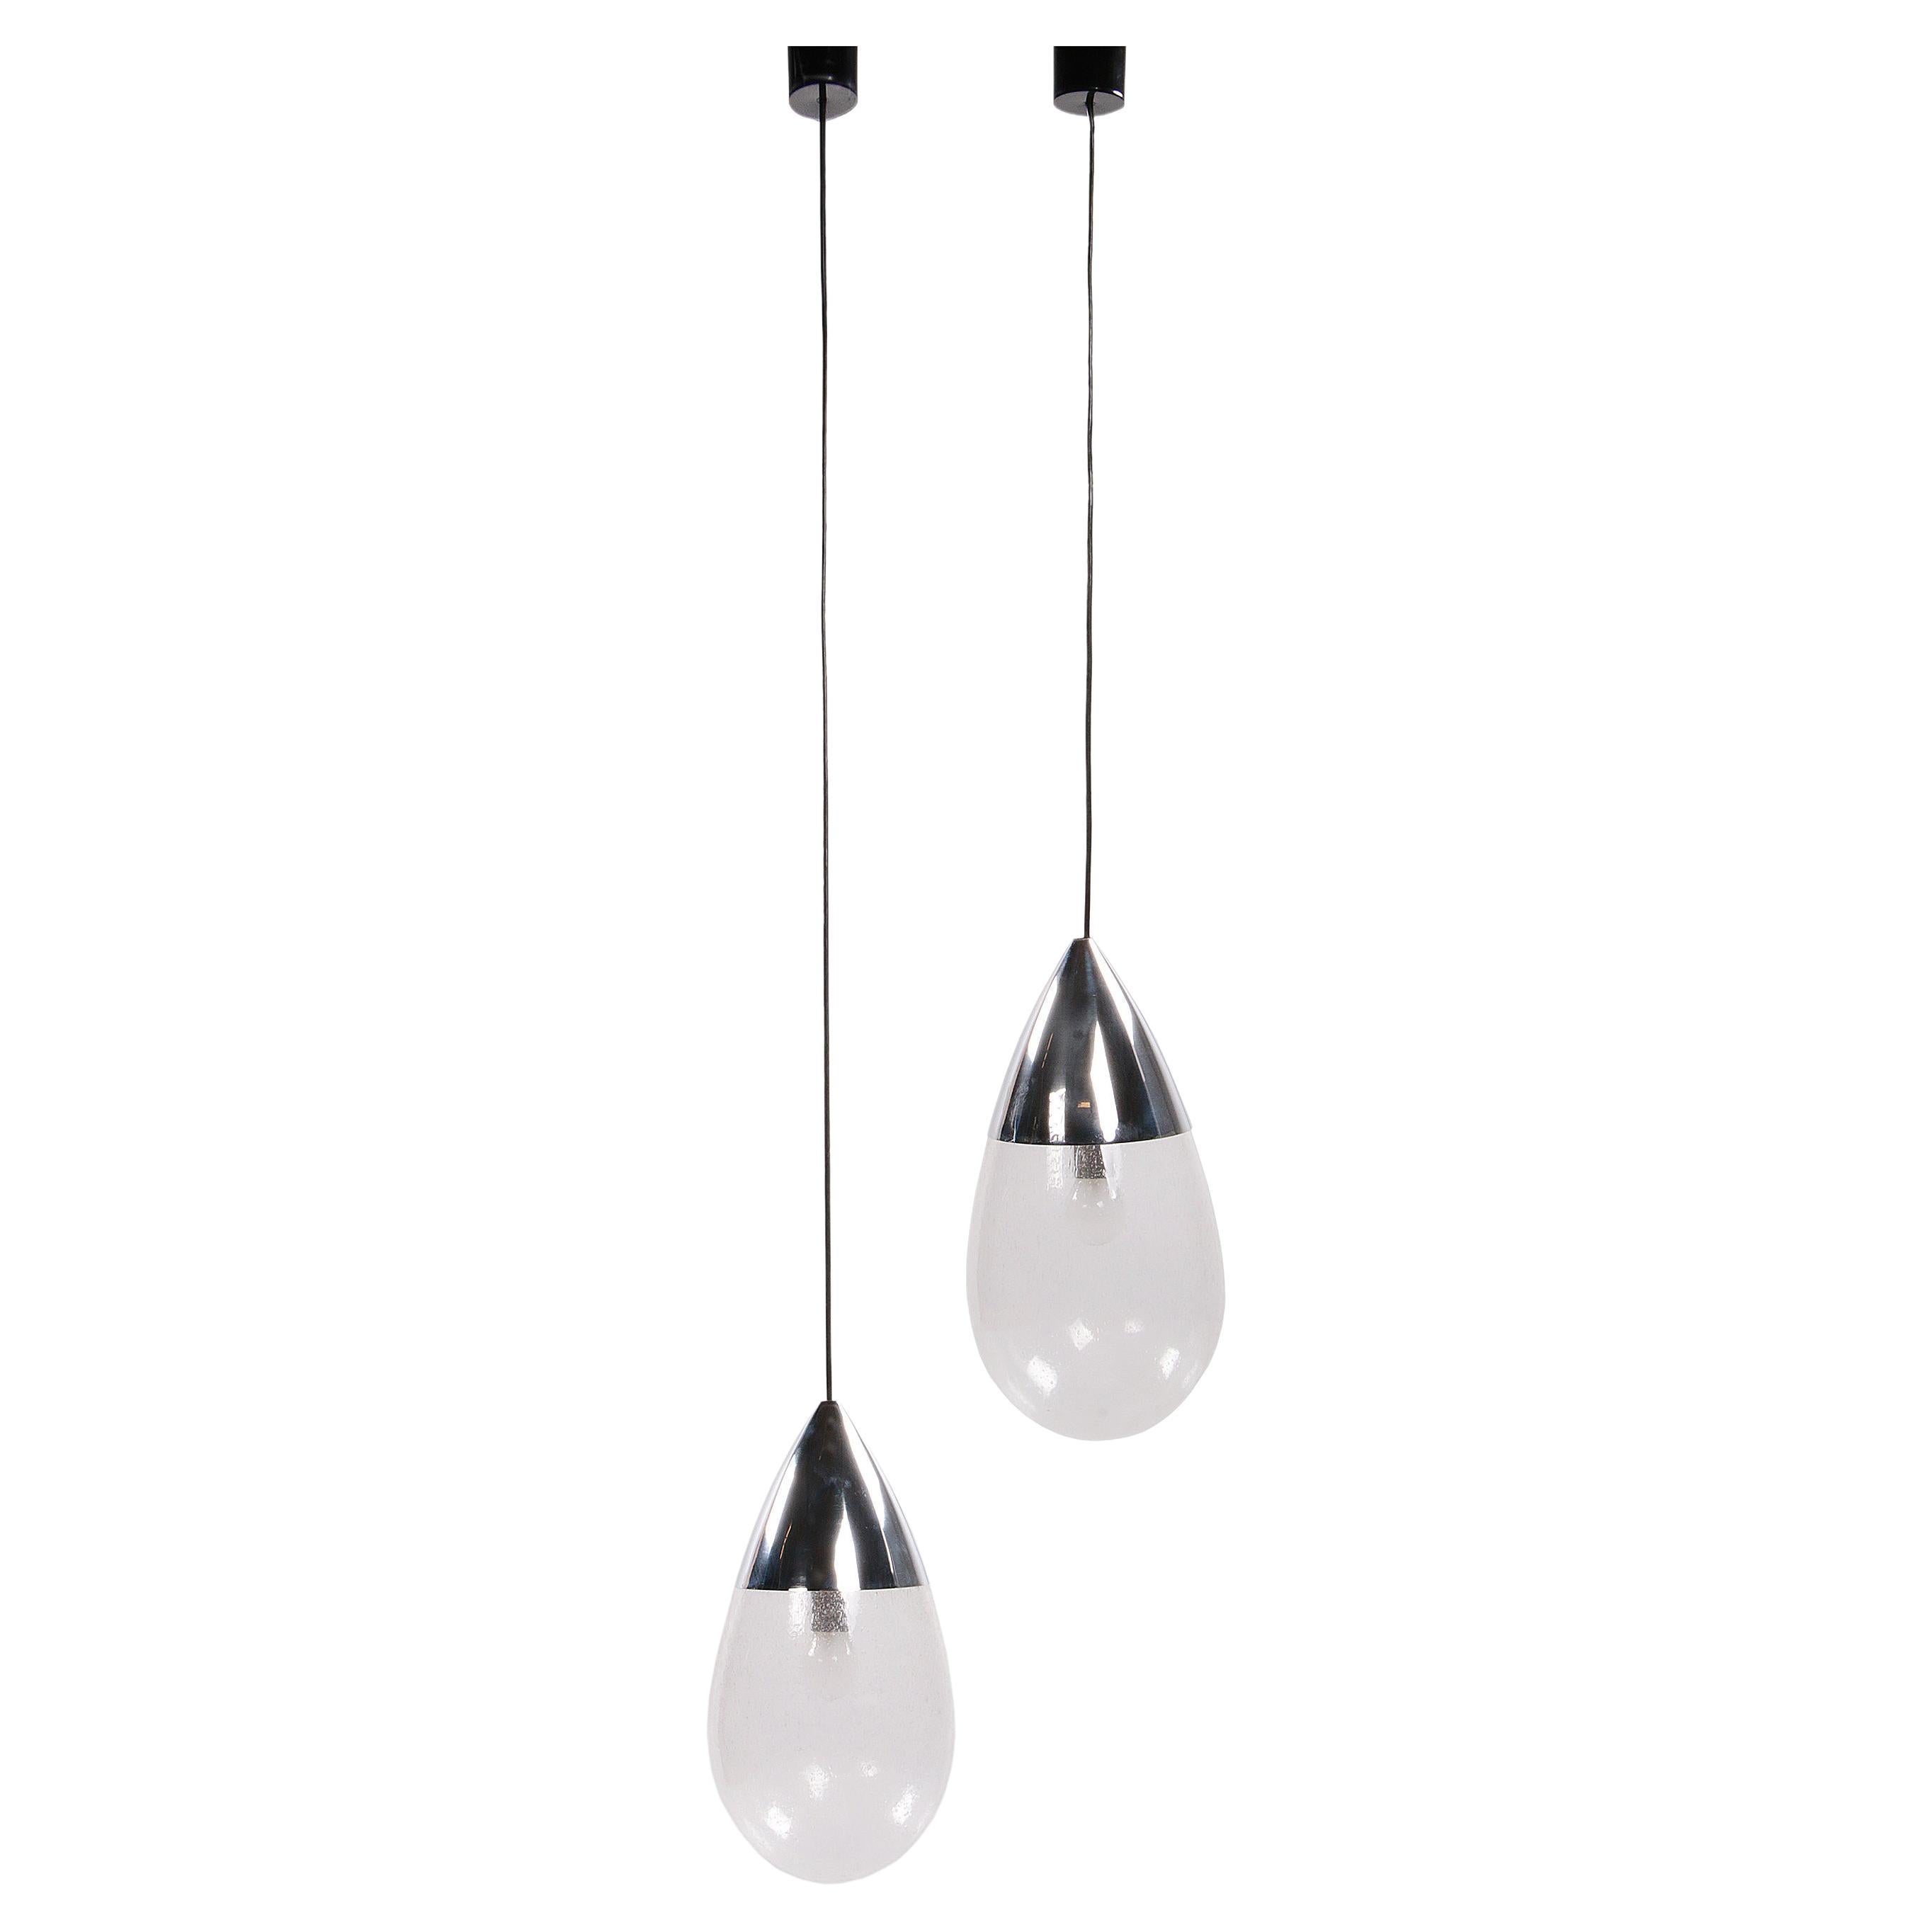 Set Hanging Lamps by Glashutte Limburg Model Drop, 1970 Germany For Sale